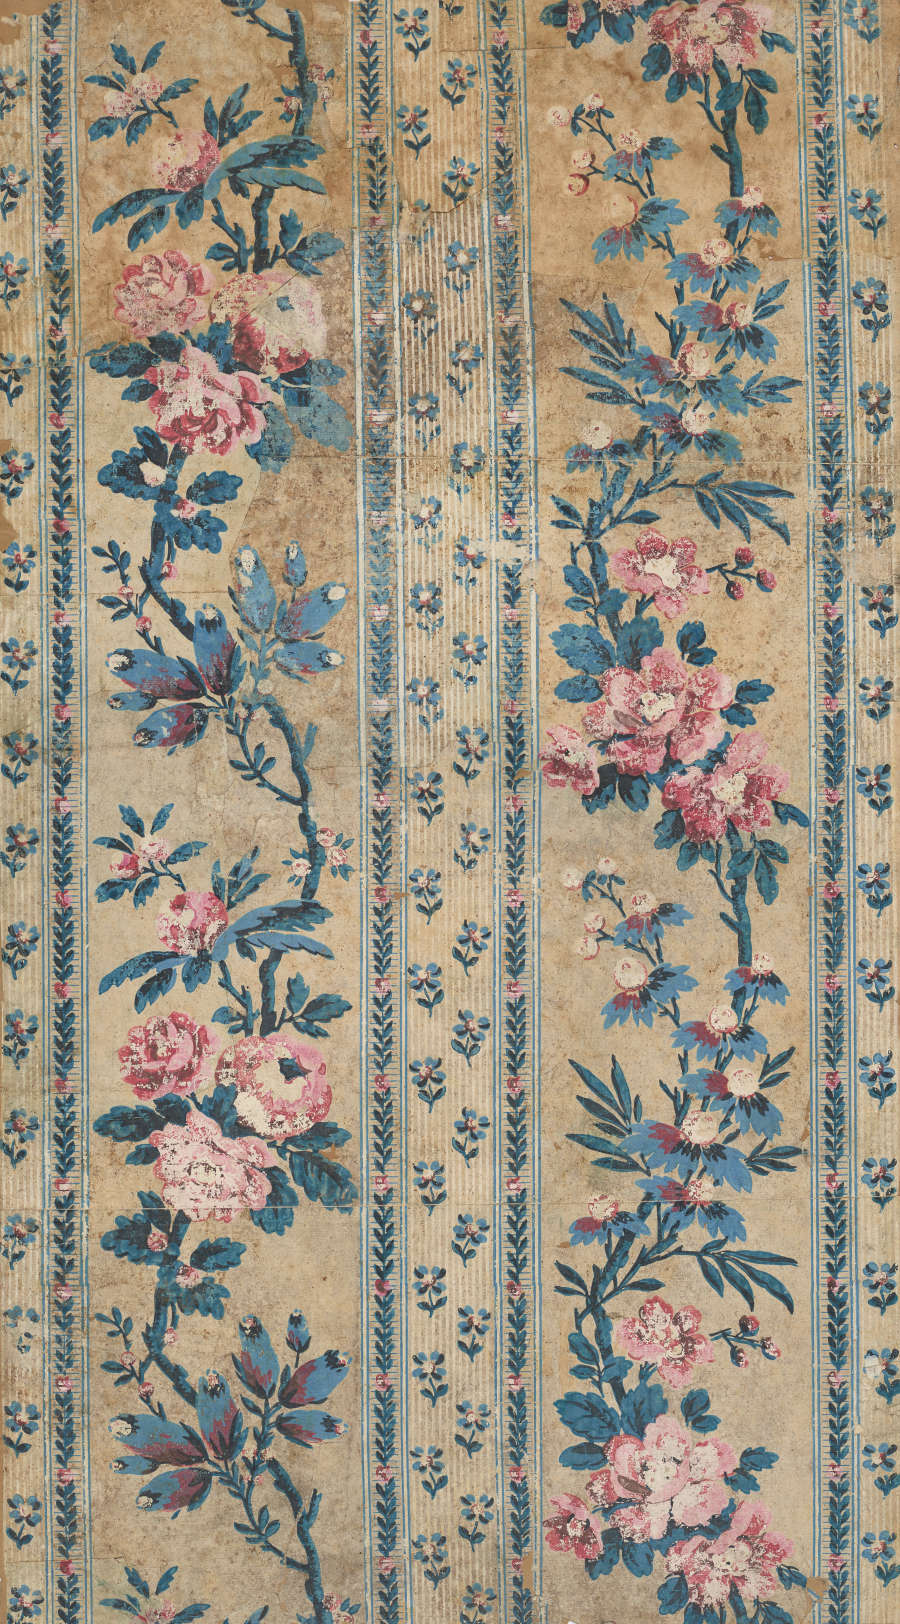 Panel of vintage fabric wallpaper featuring vertically aligned, faded pink and blue garlands alongside patterned columns of small floral motifs. The design is set on a mottled beige background.